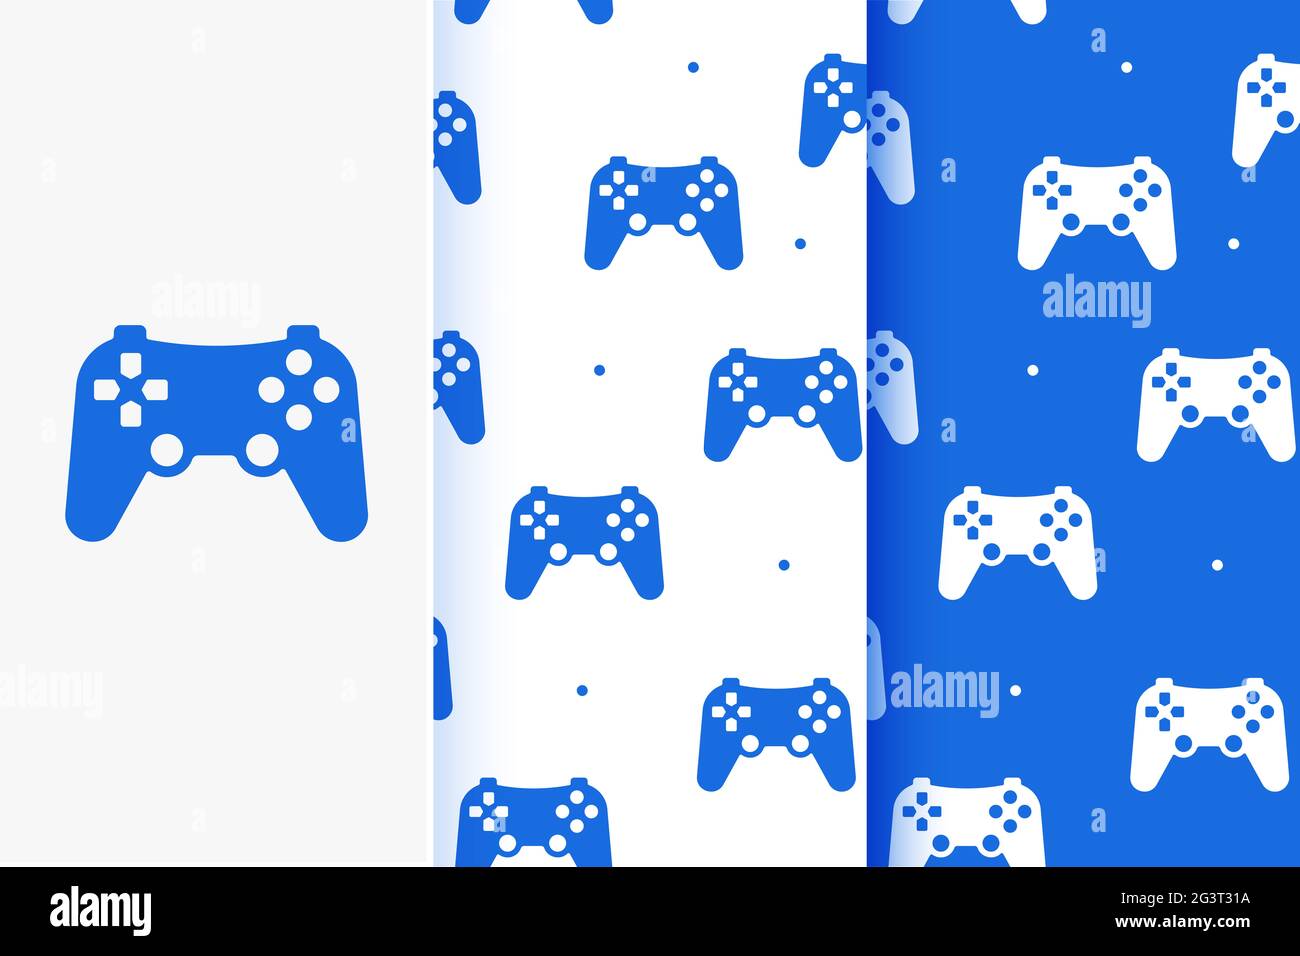 Set of seamless patterns of game joystick in flat style. Stock Photo